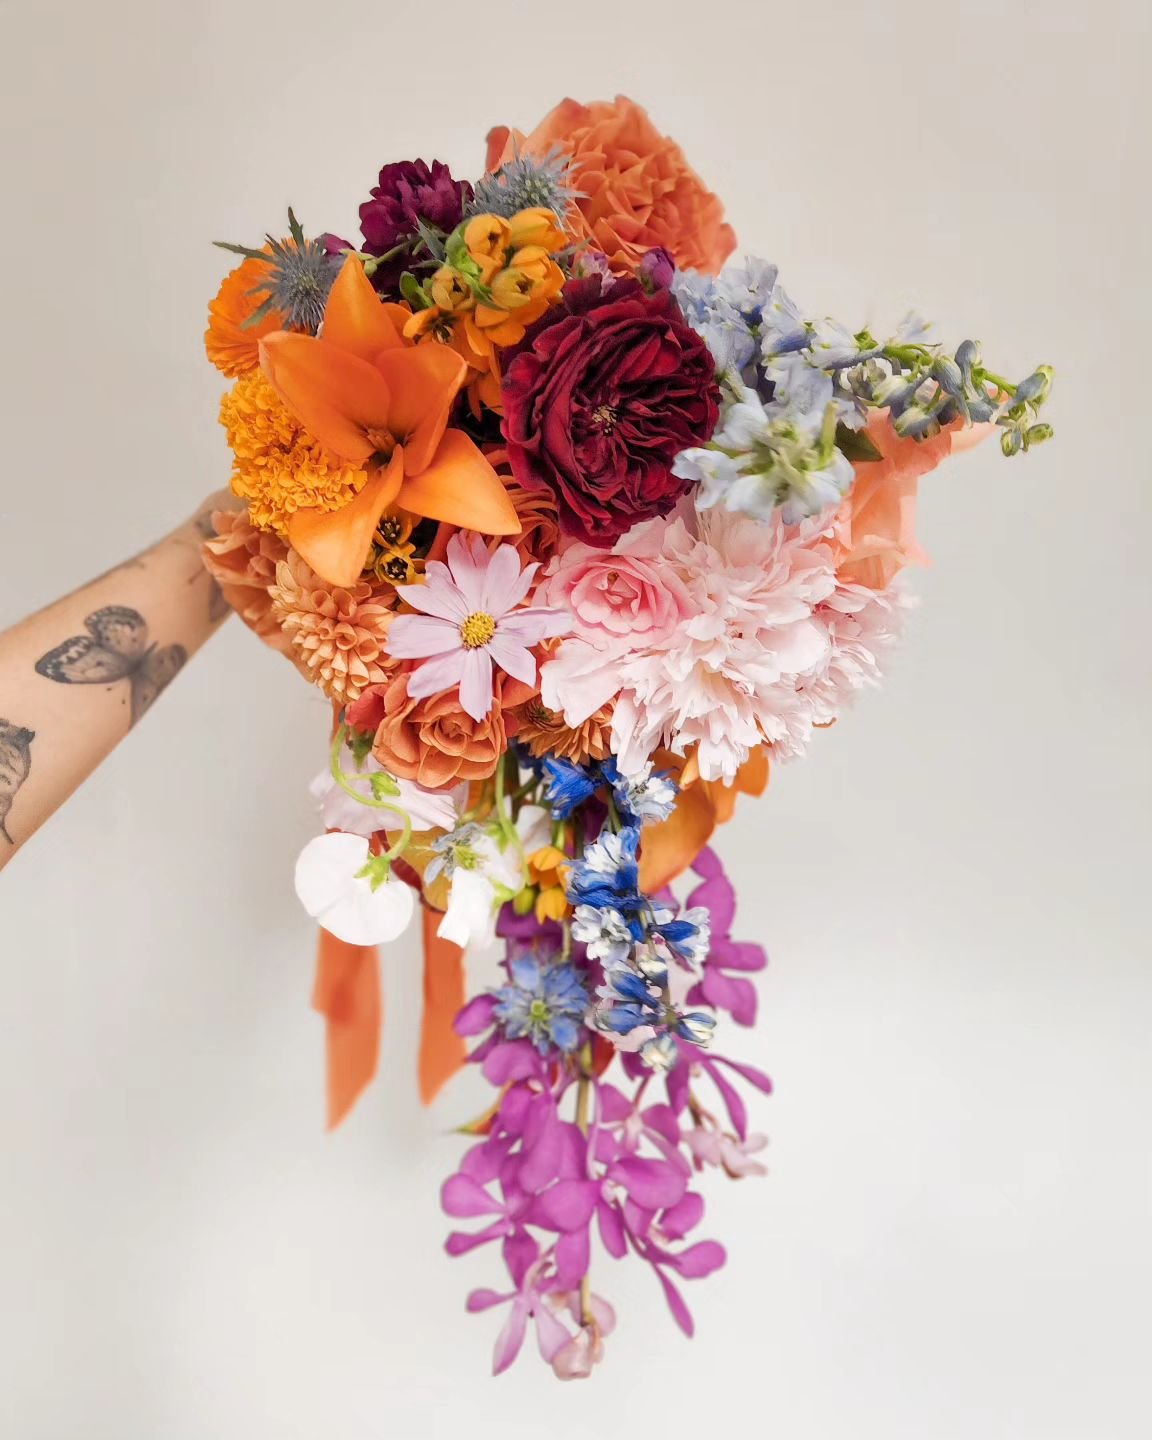 A super colourful bridal from a few years back ❤️🩷🧡🩵

I loved this bouquet, and looking back, it is still one of my favorites! The groom grew up around tropical blooms and they wanted to incorporate some of that colour into their bouquet, but with